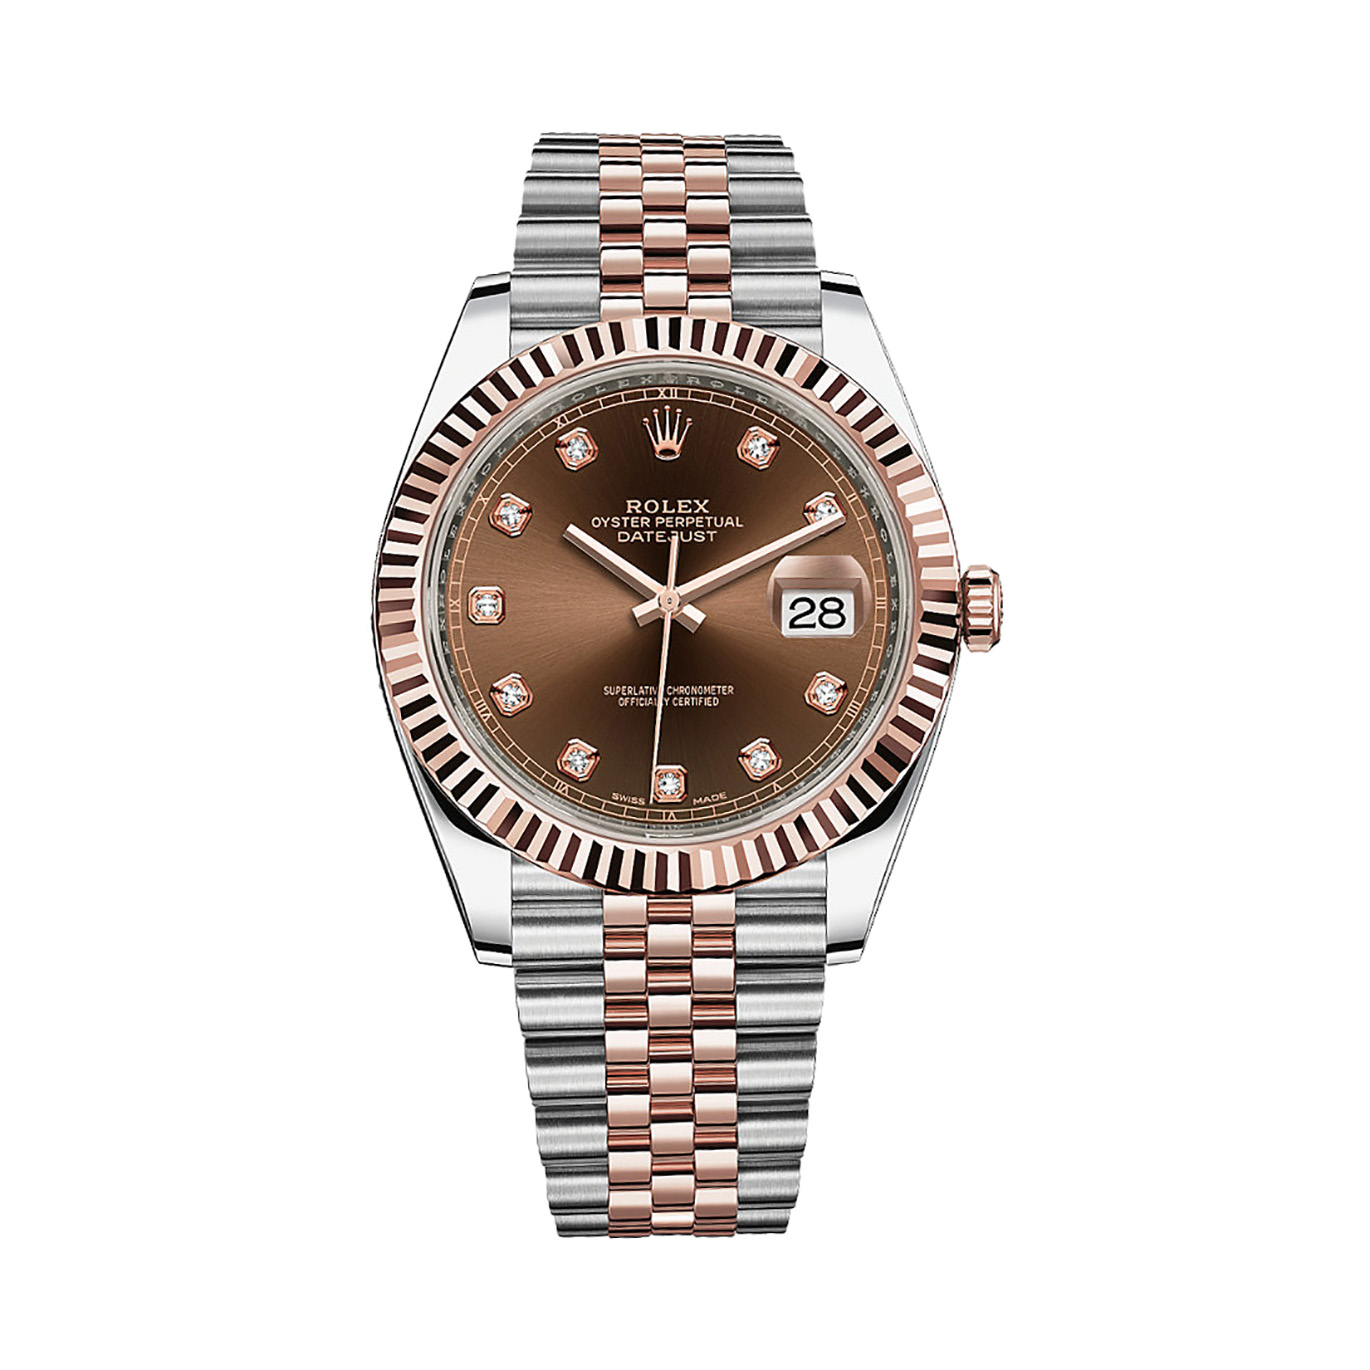 Datejust 41 126331 Rose Gold & Stainless Steel Watch (Chocolate Set With Diamonds)